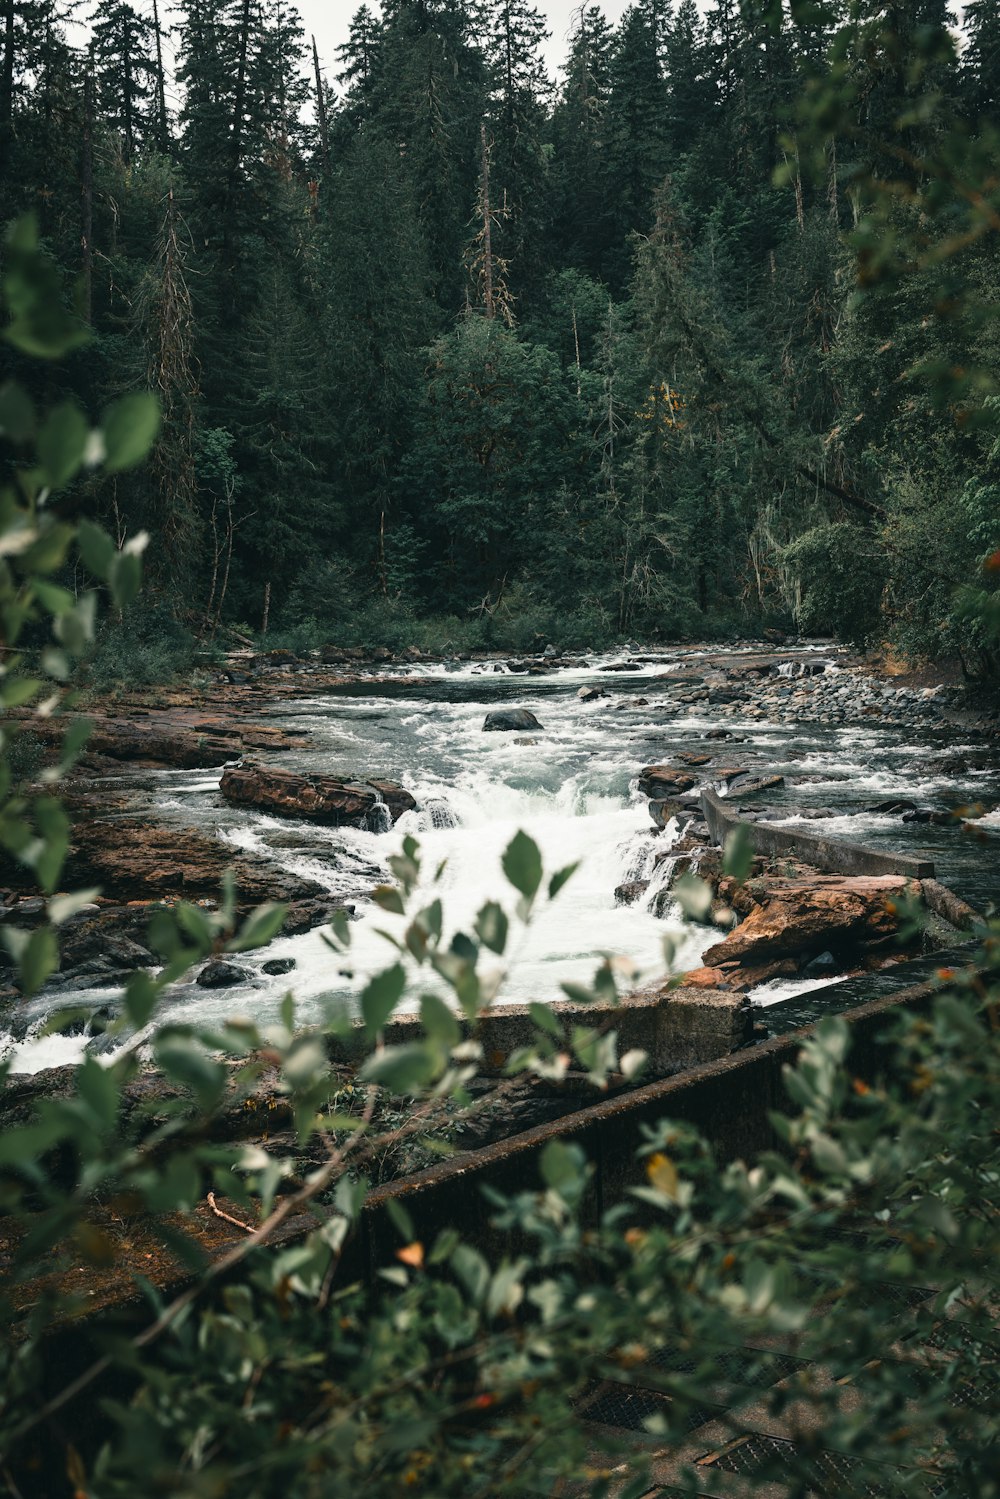 a river running through a forest filled with trees